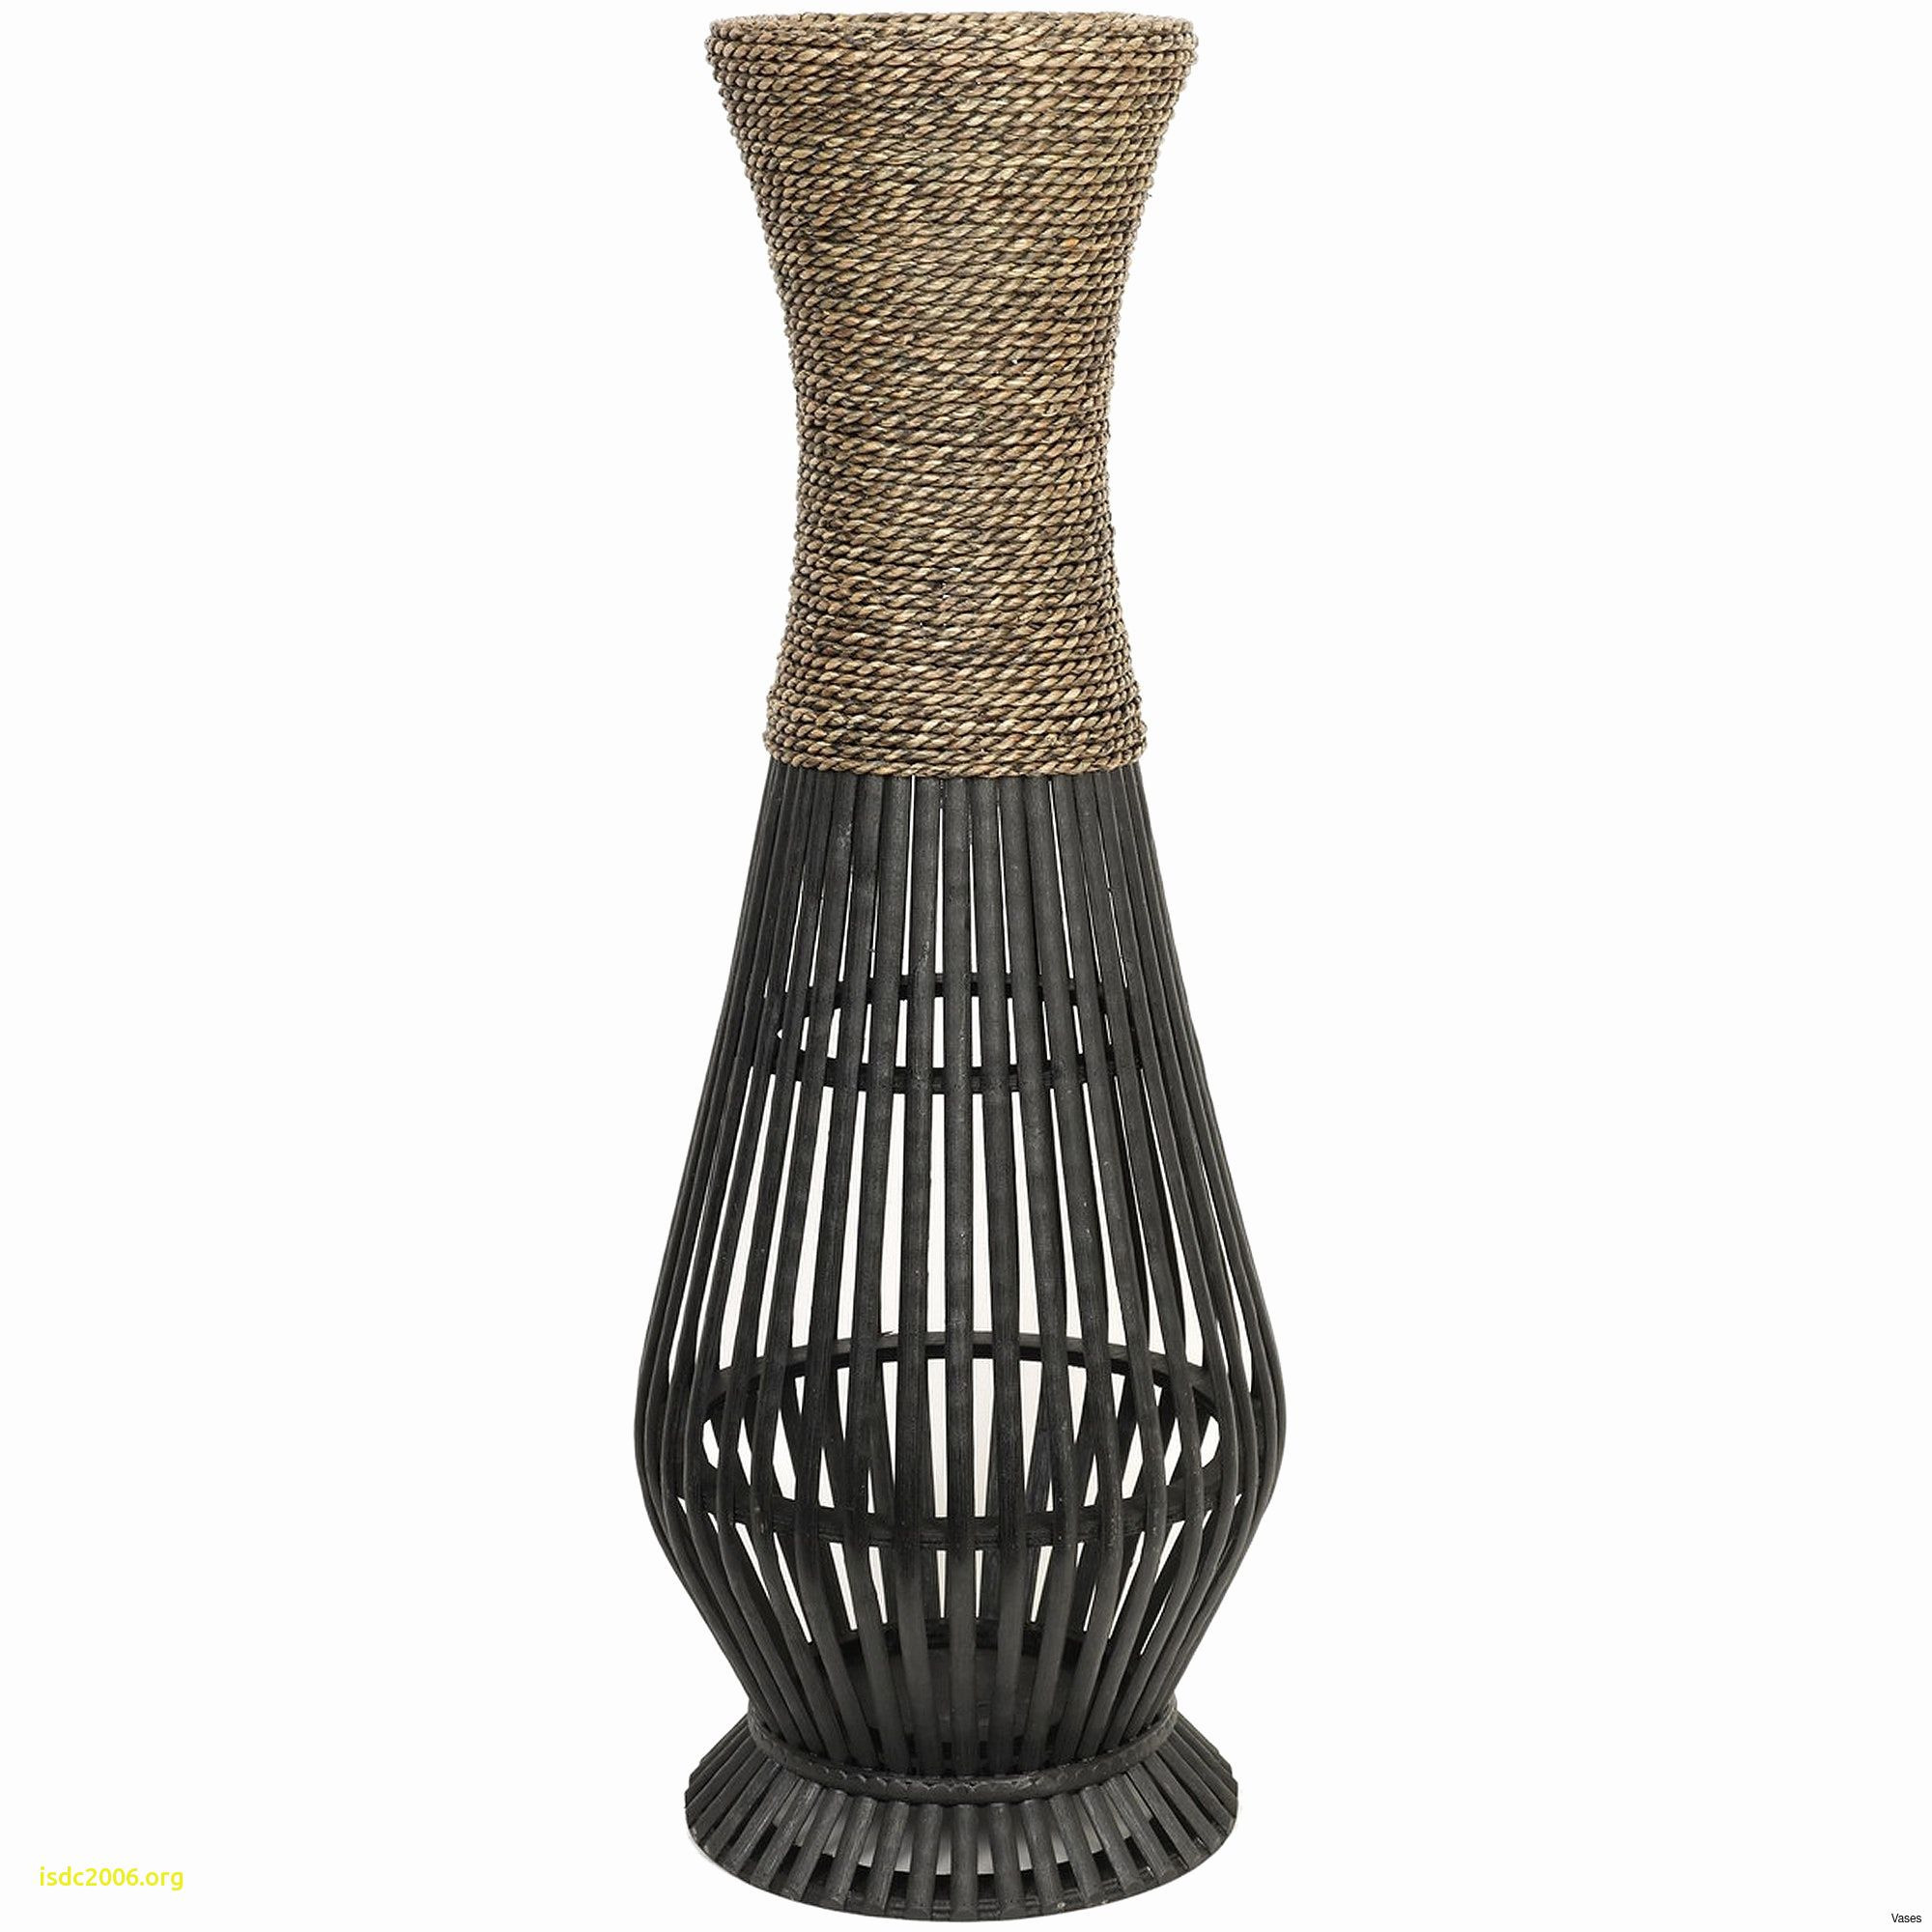 decorative floor vases amazon of photos of tall wood vase vases artificial plants collection inside tall wood vase photos new home decor vases house design and decoration idea of photos